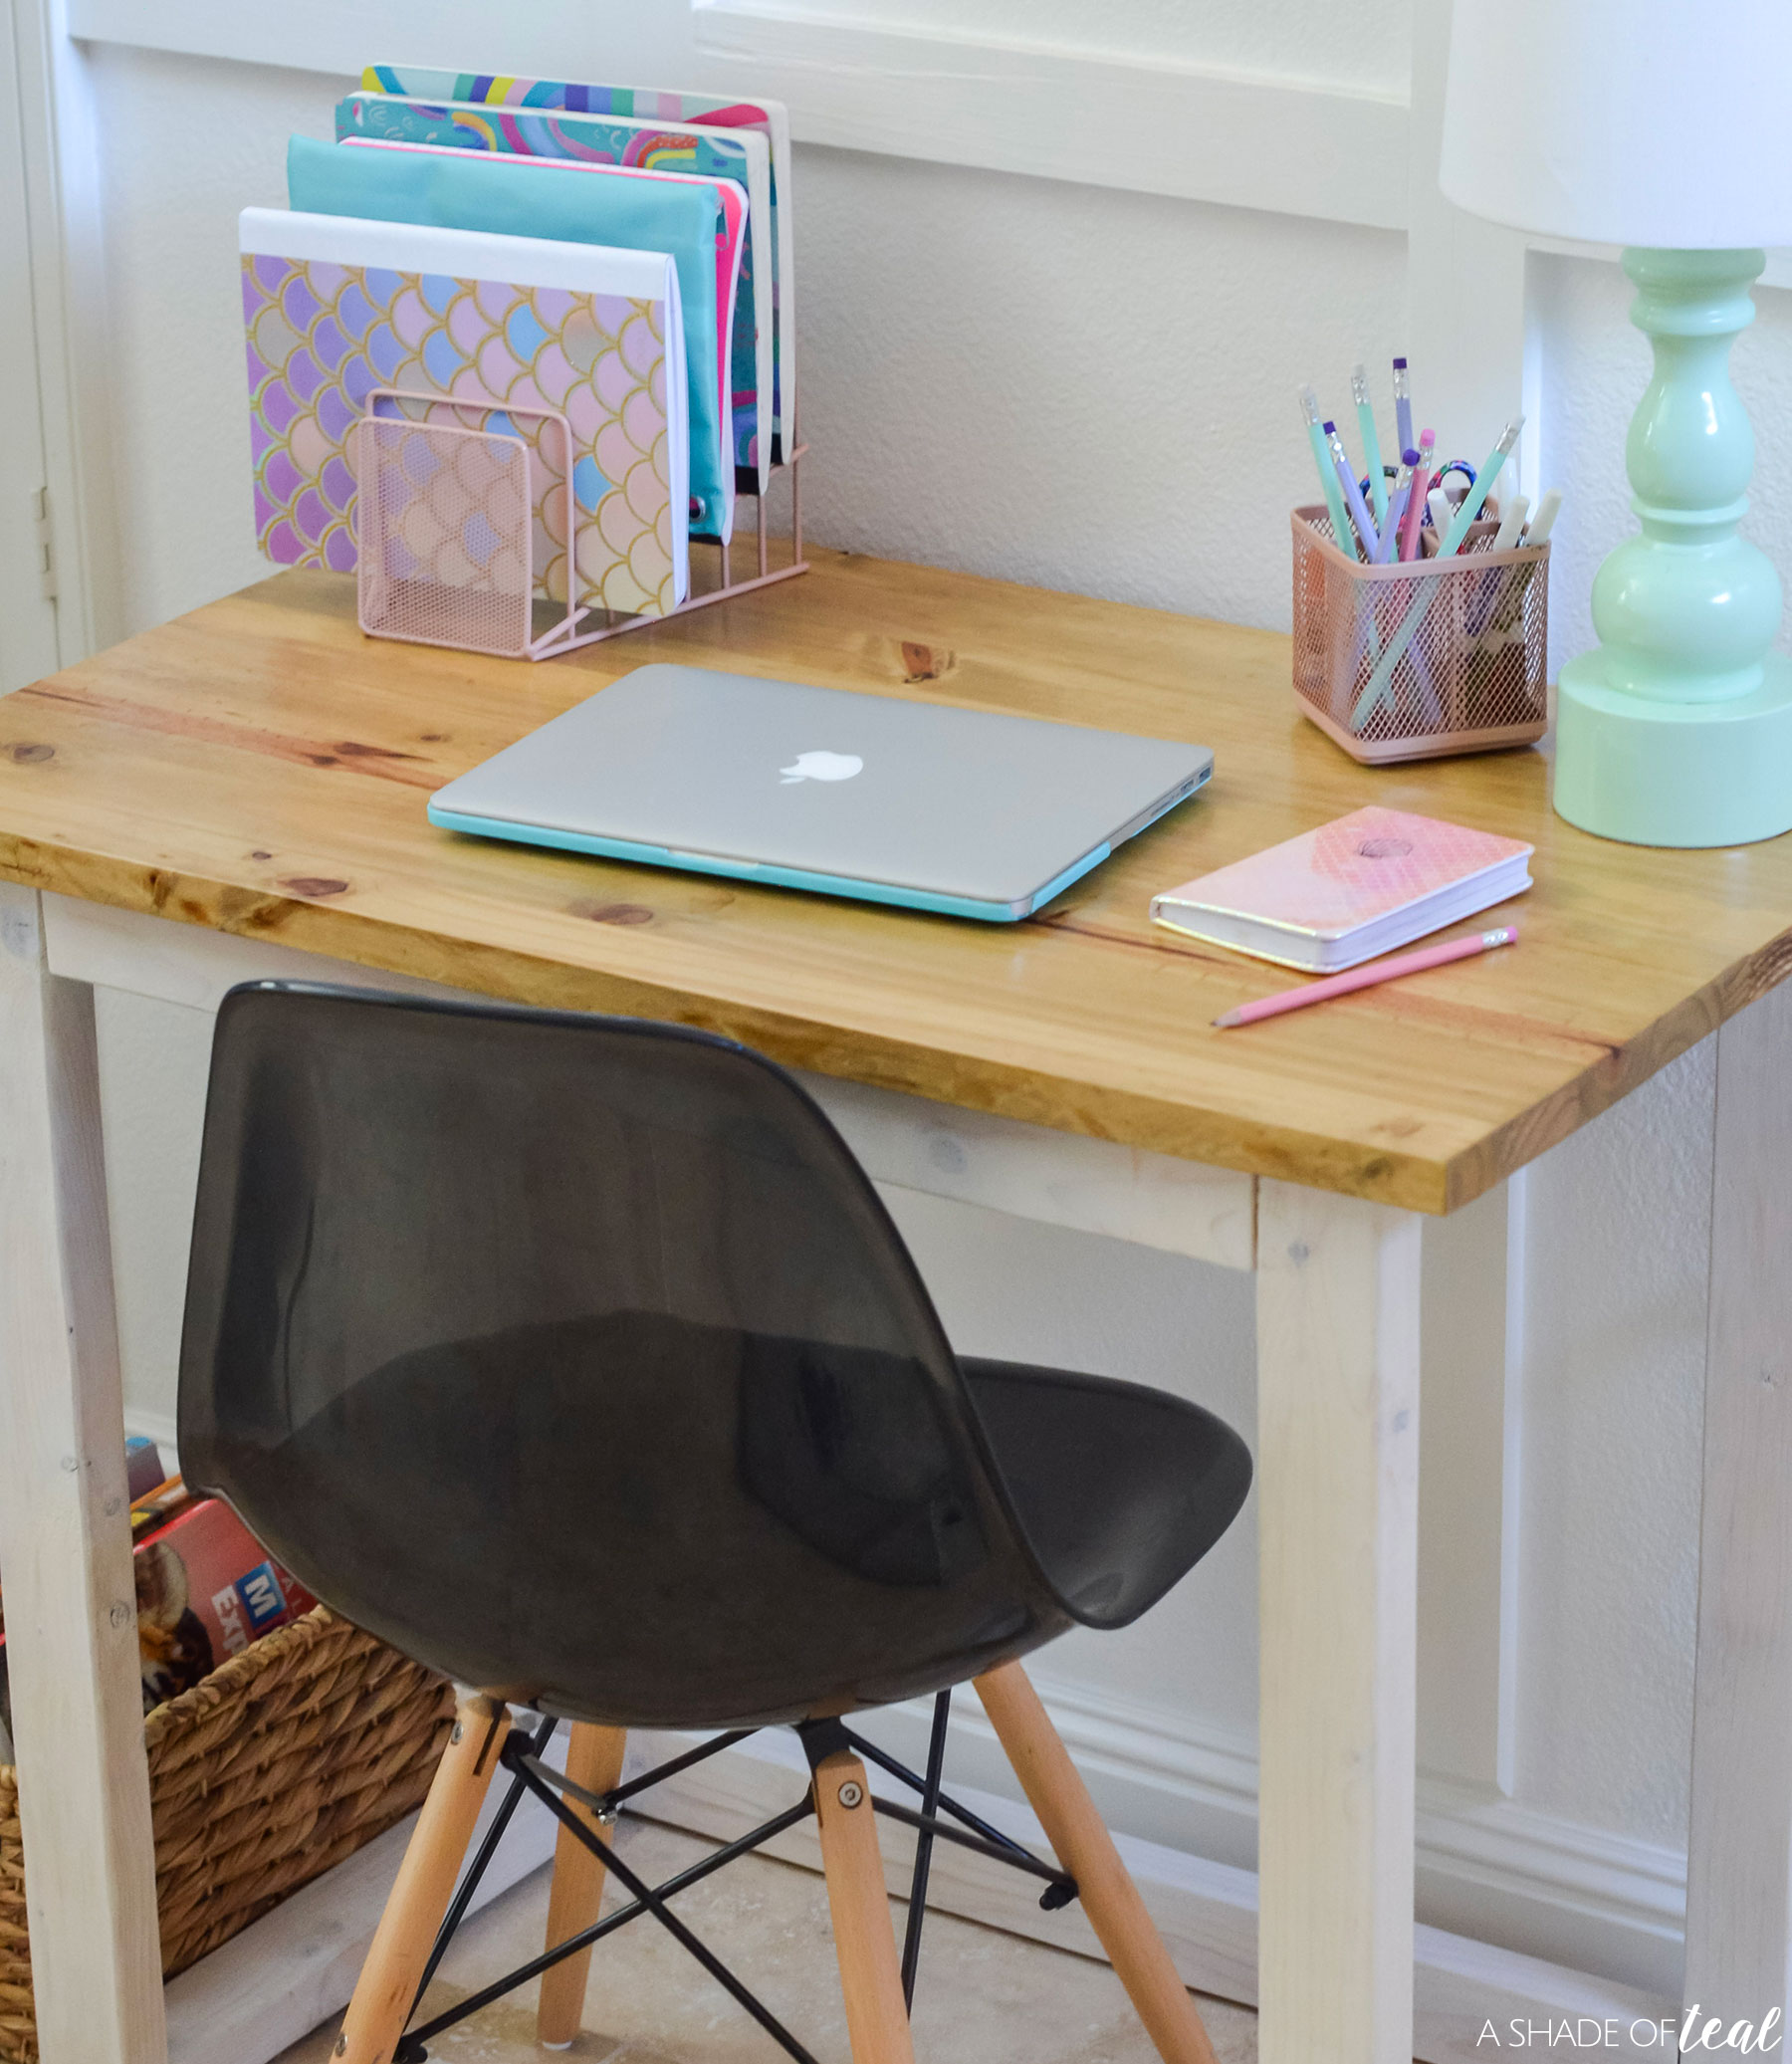 https://ashadeofteal.com/wp-content/uploads/2020/11/How-to-Make-a-Simple-DIY-Desk.aShadeOfTeal-12.jpg